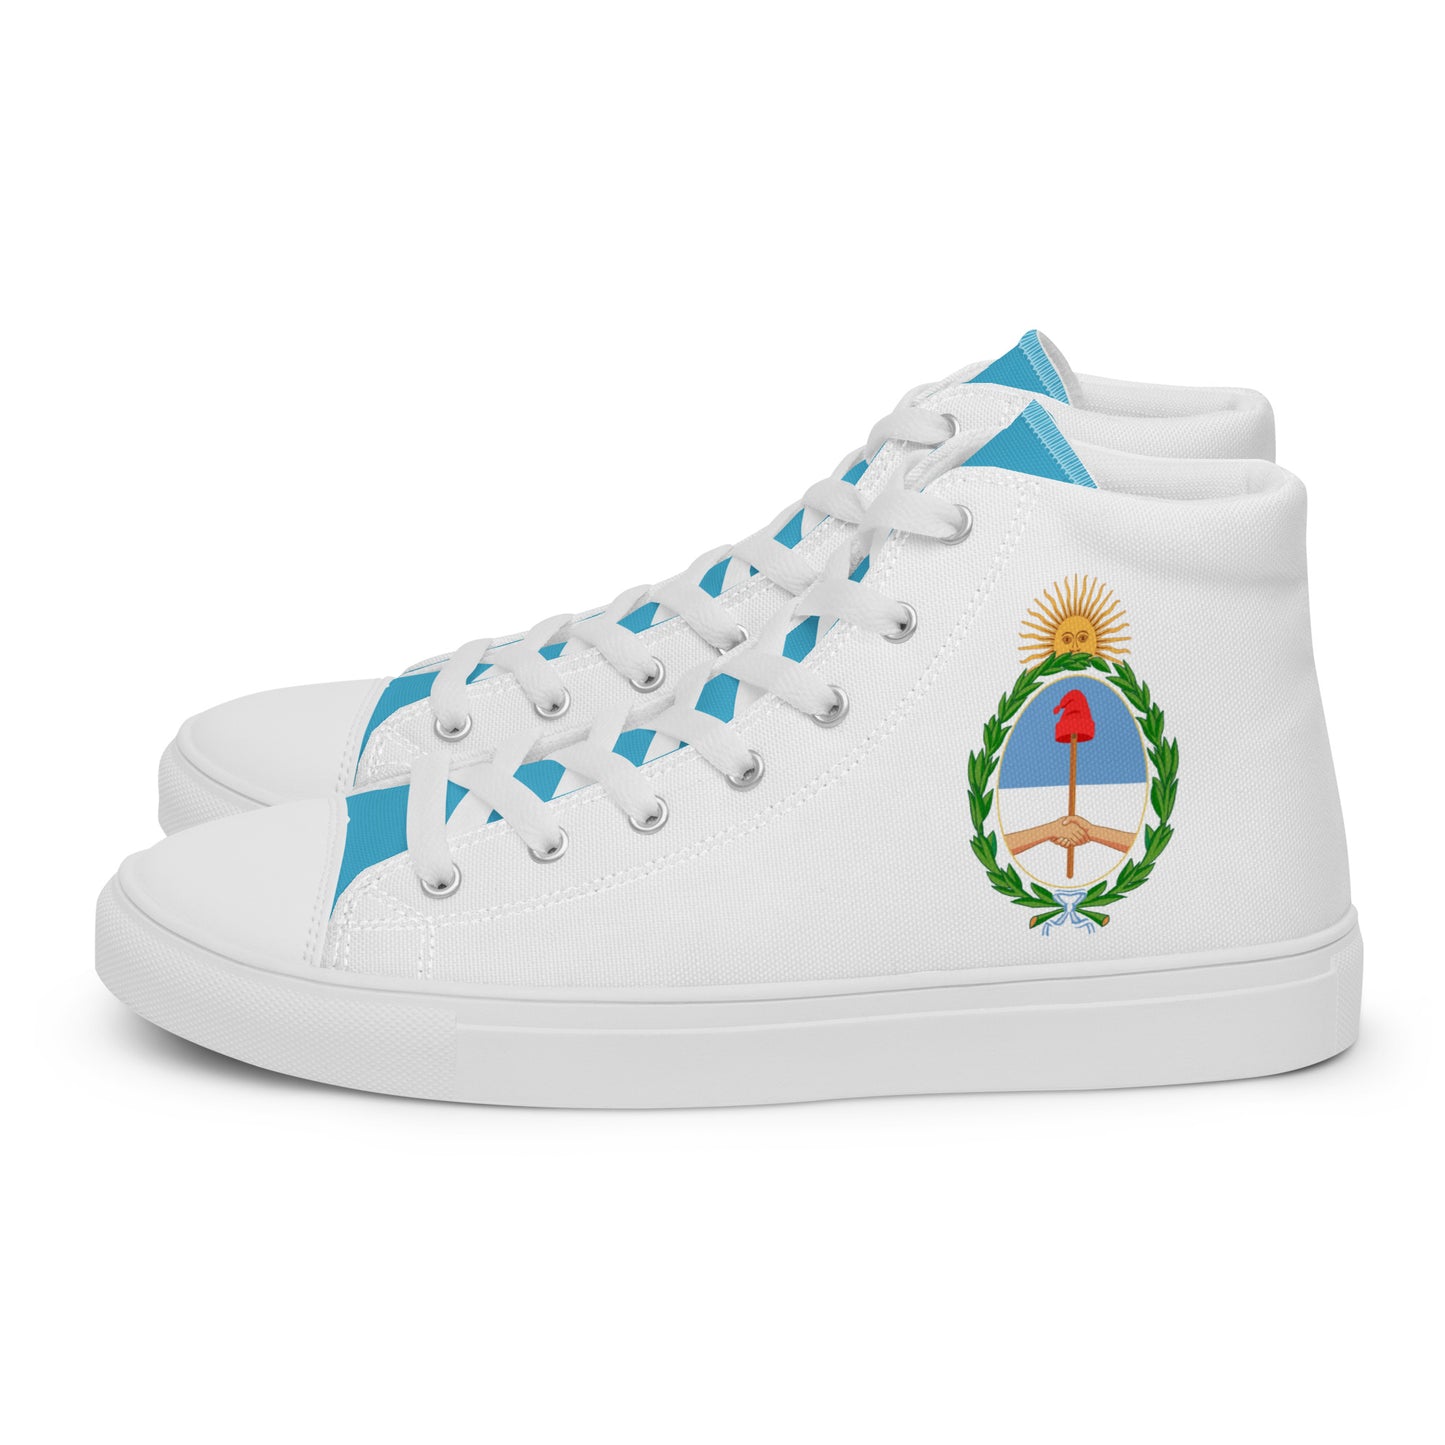 Argentina - Women - White - High top shoes